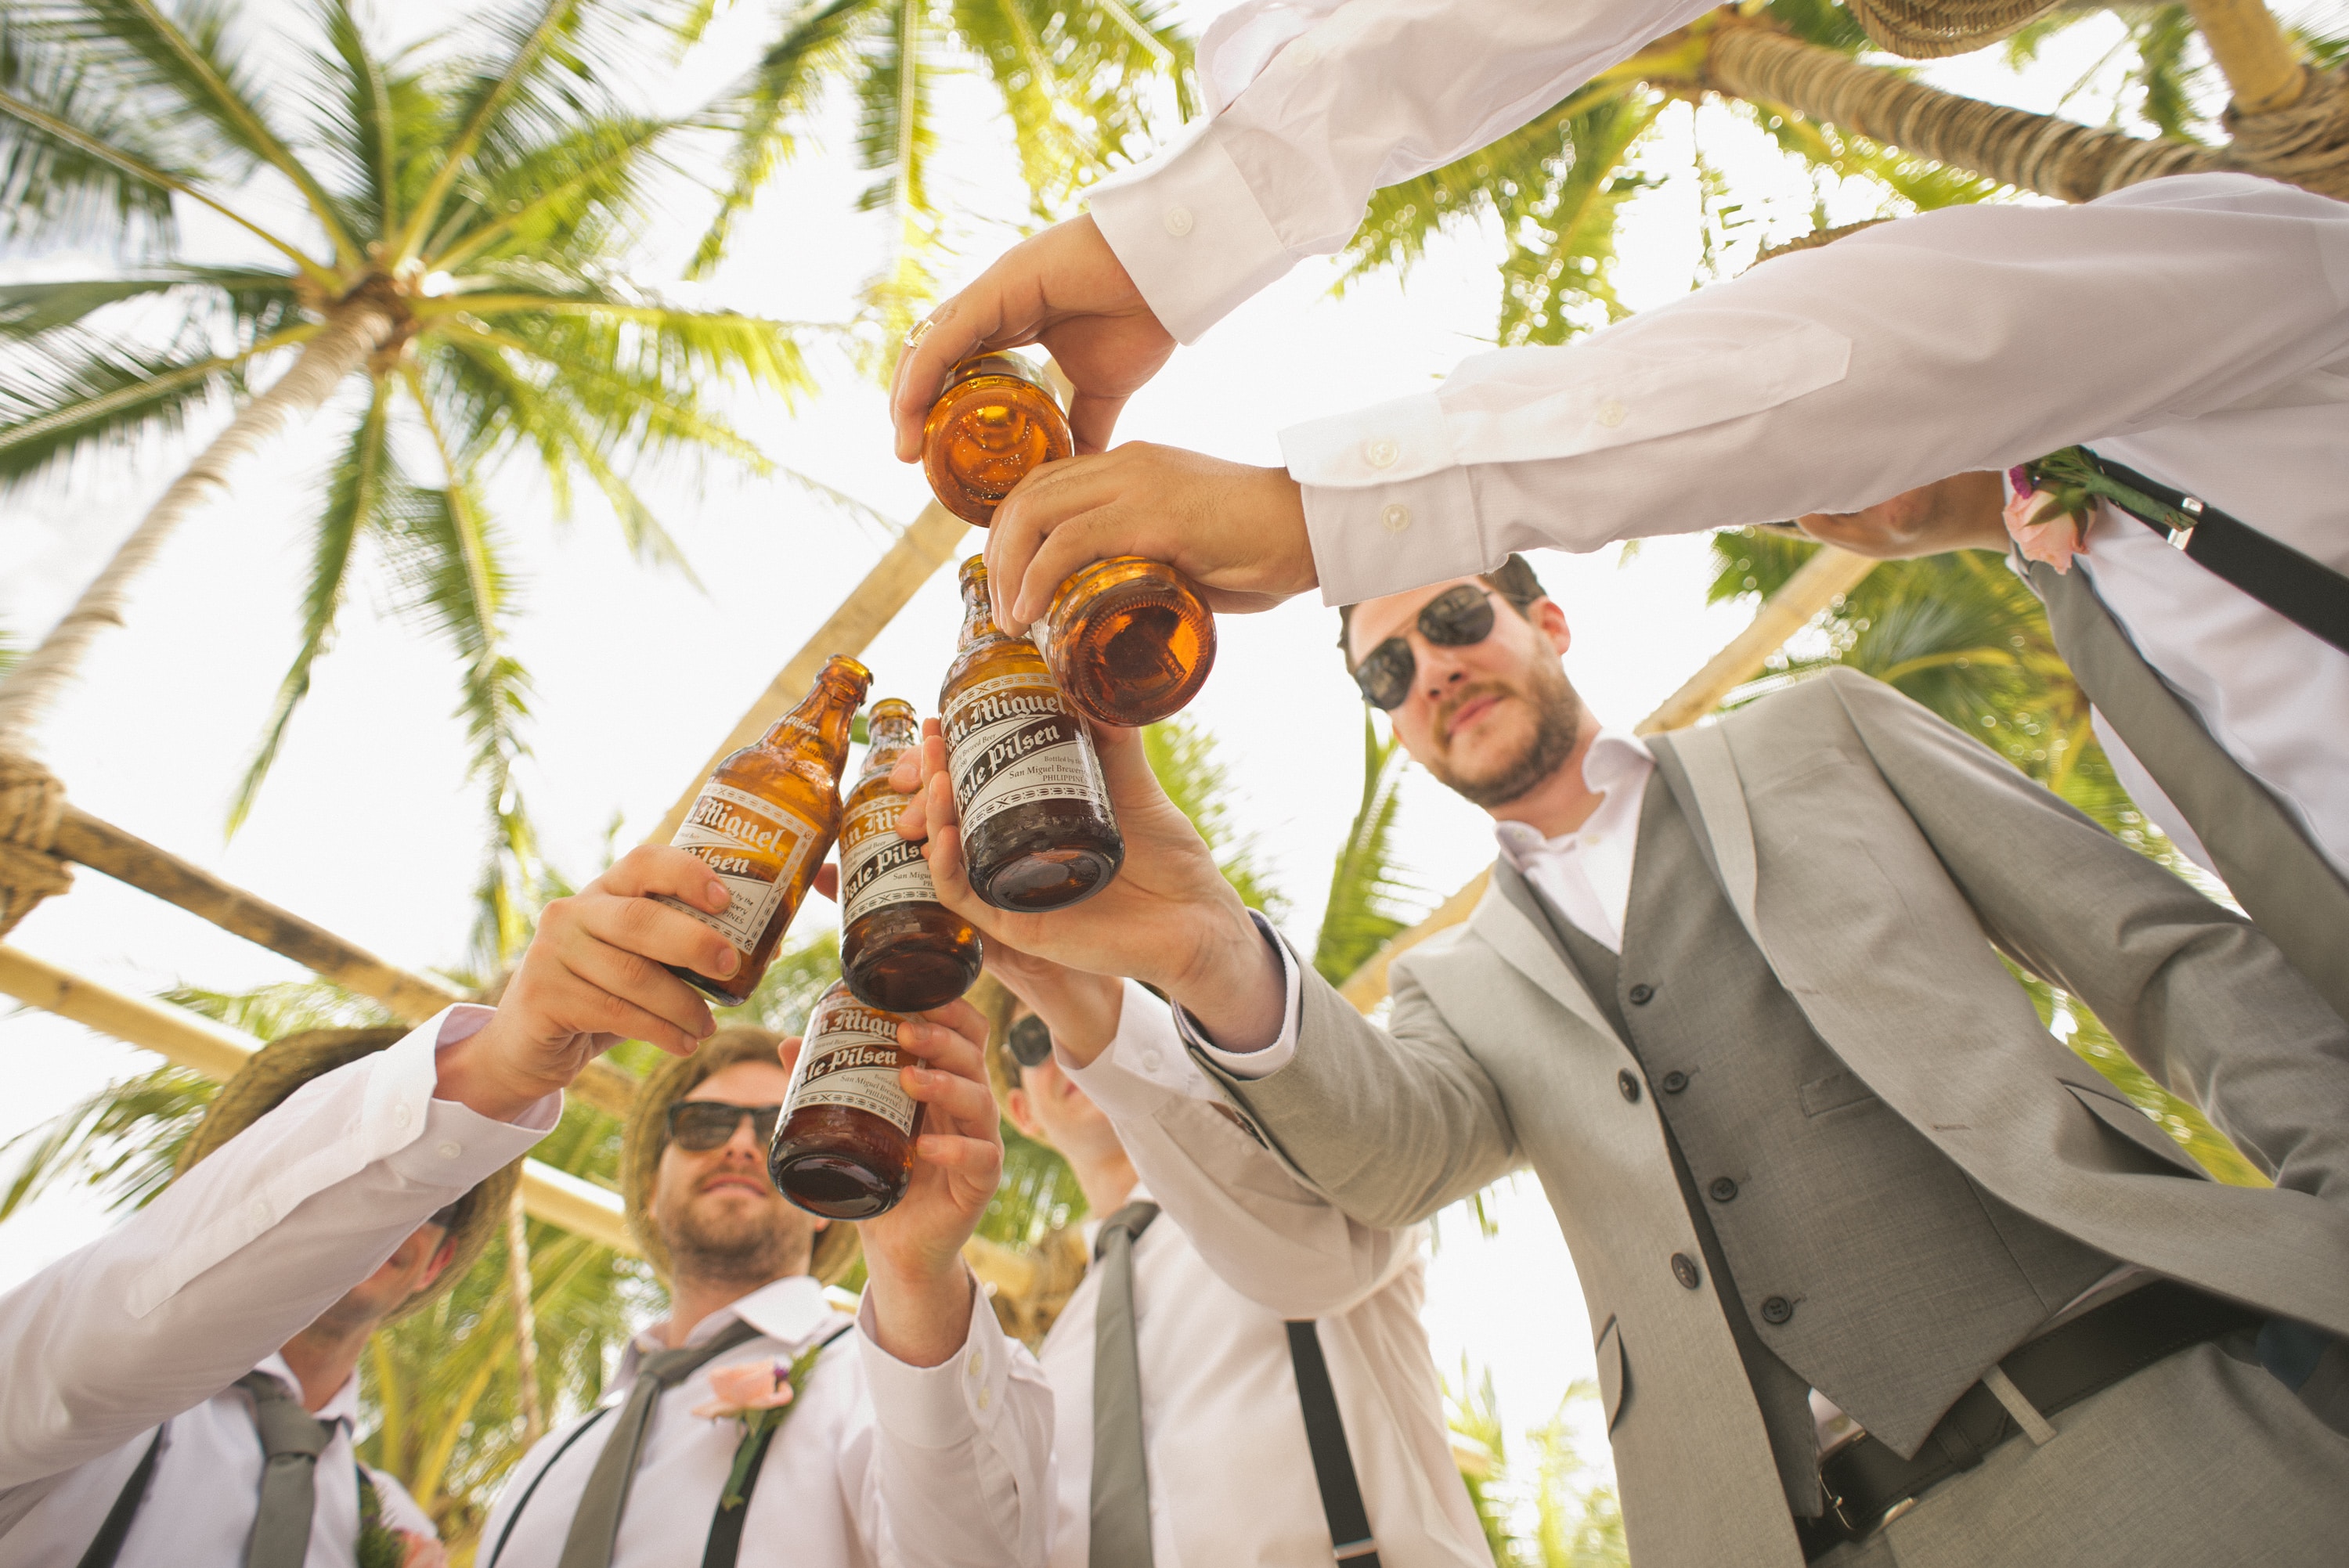 Low angle of groomsmen holding beer bottles and having a celebratory toast